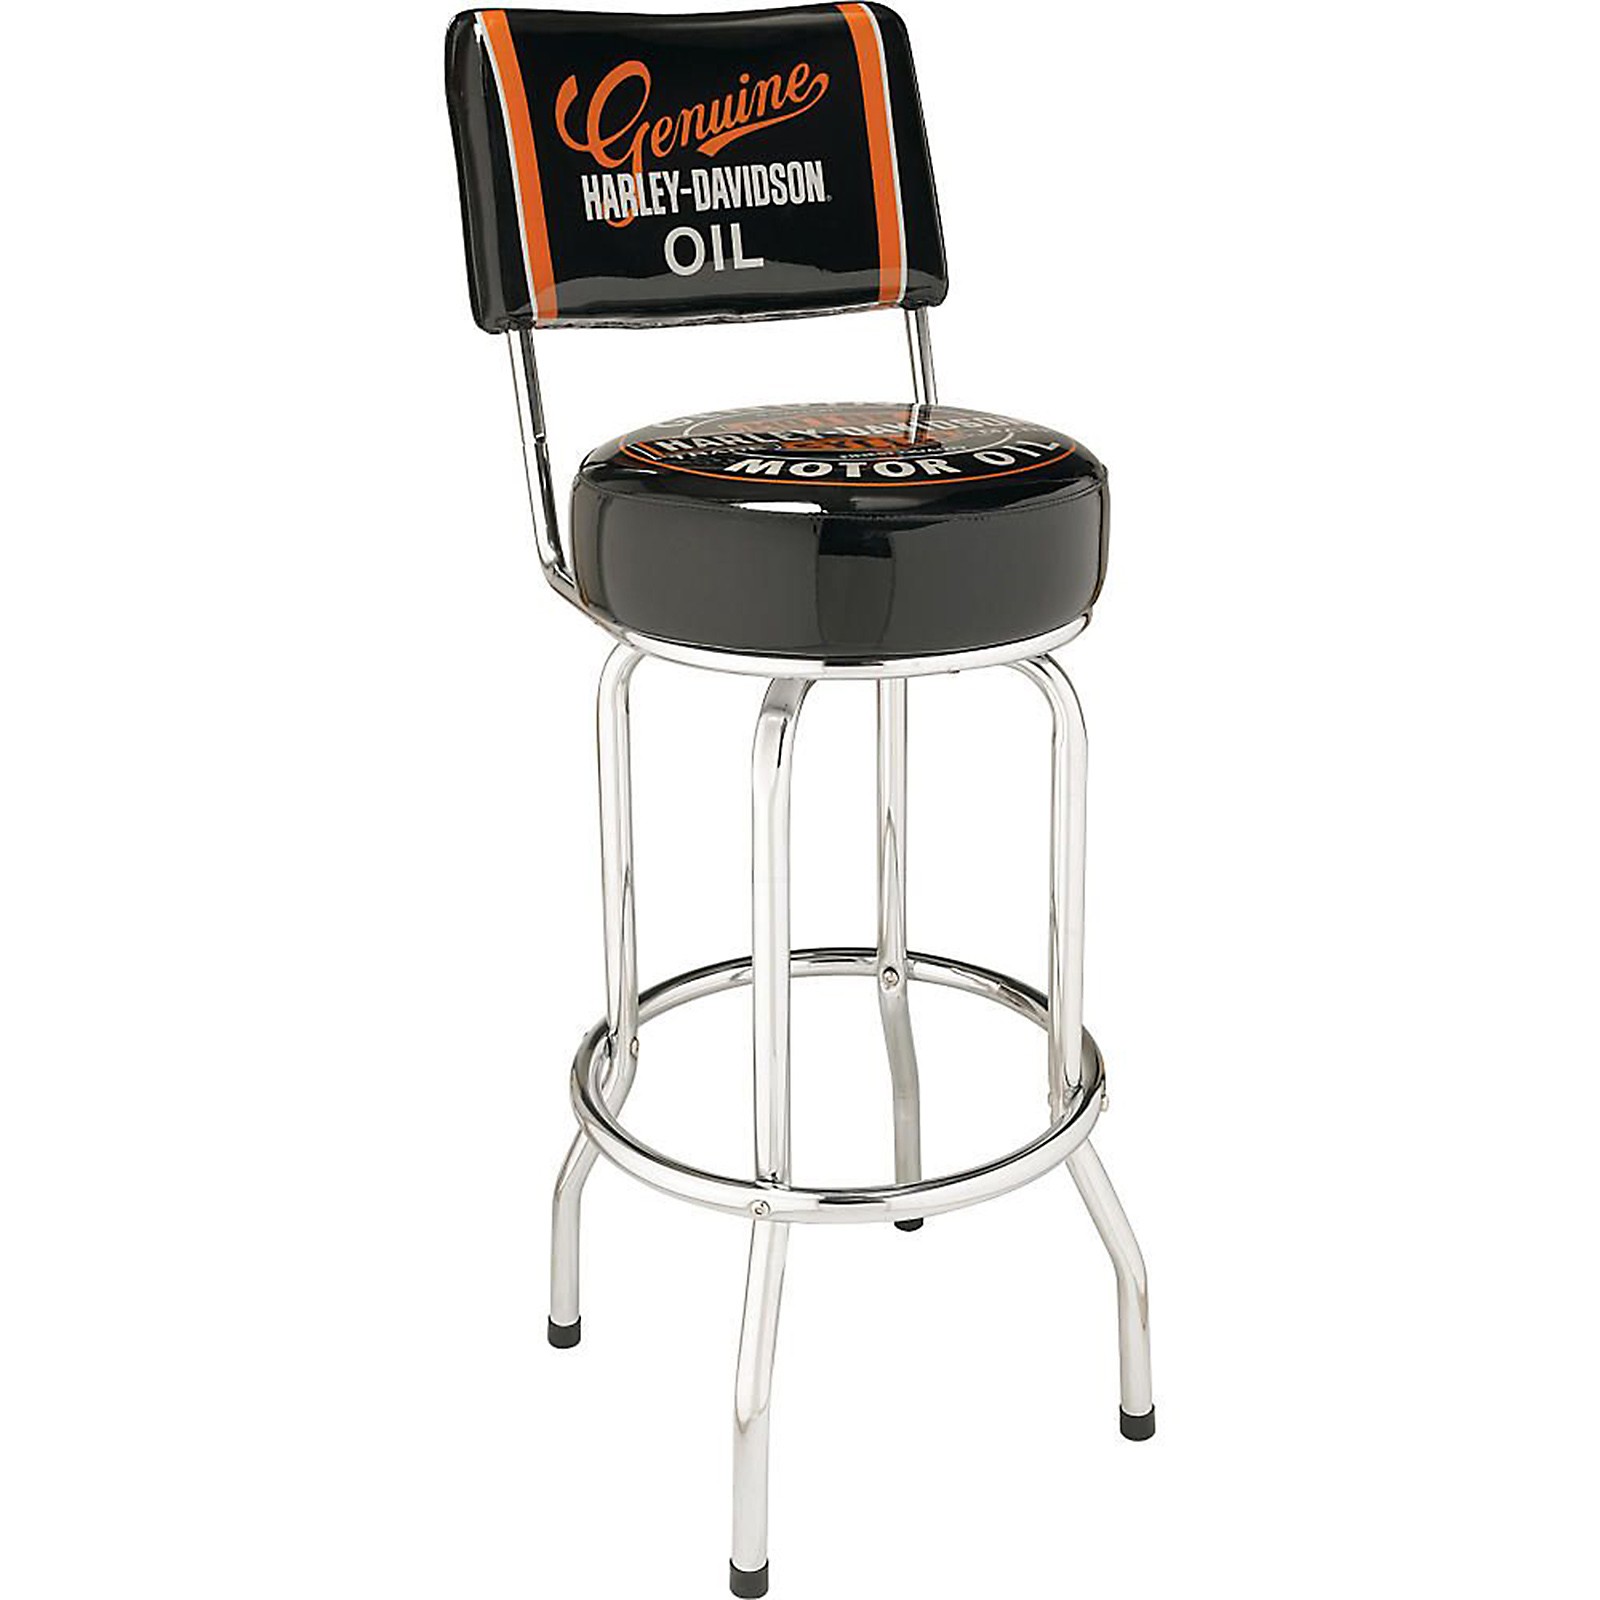 Harley davidson oil can bar stool with back 1